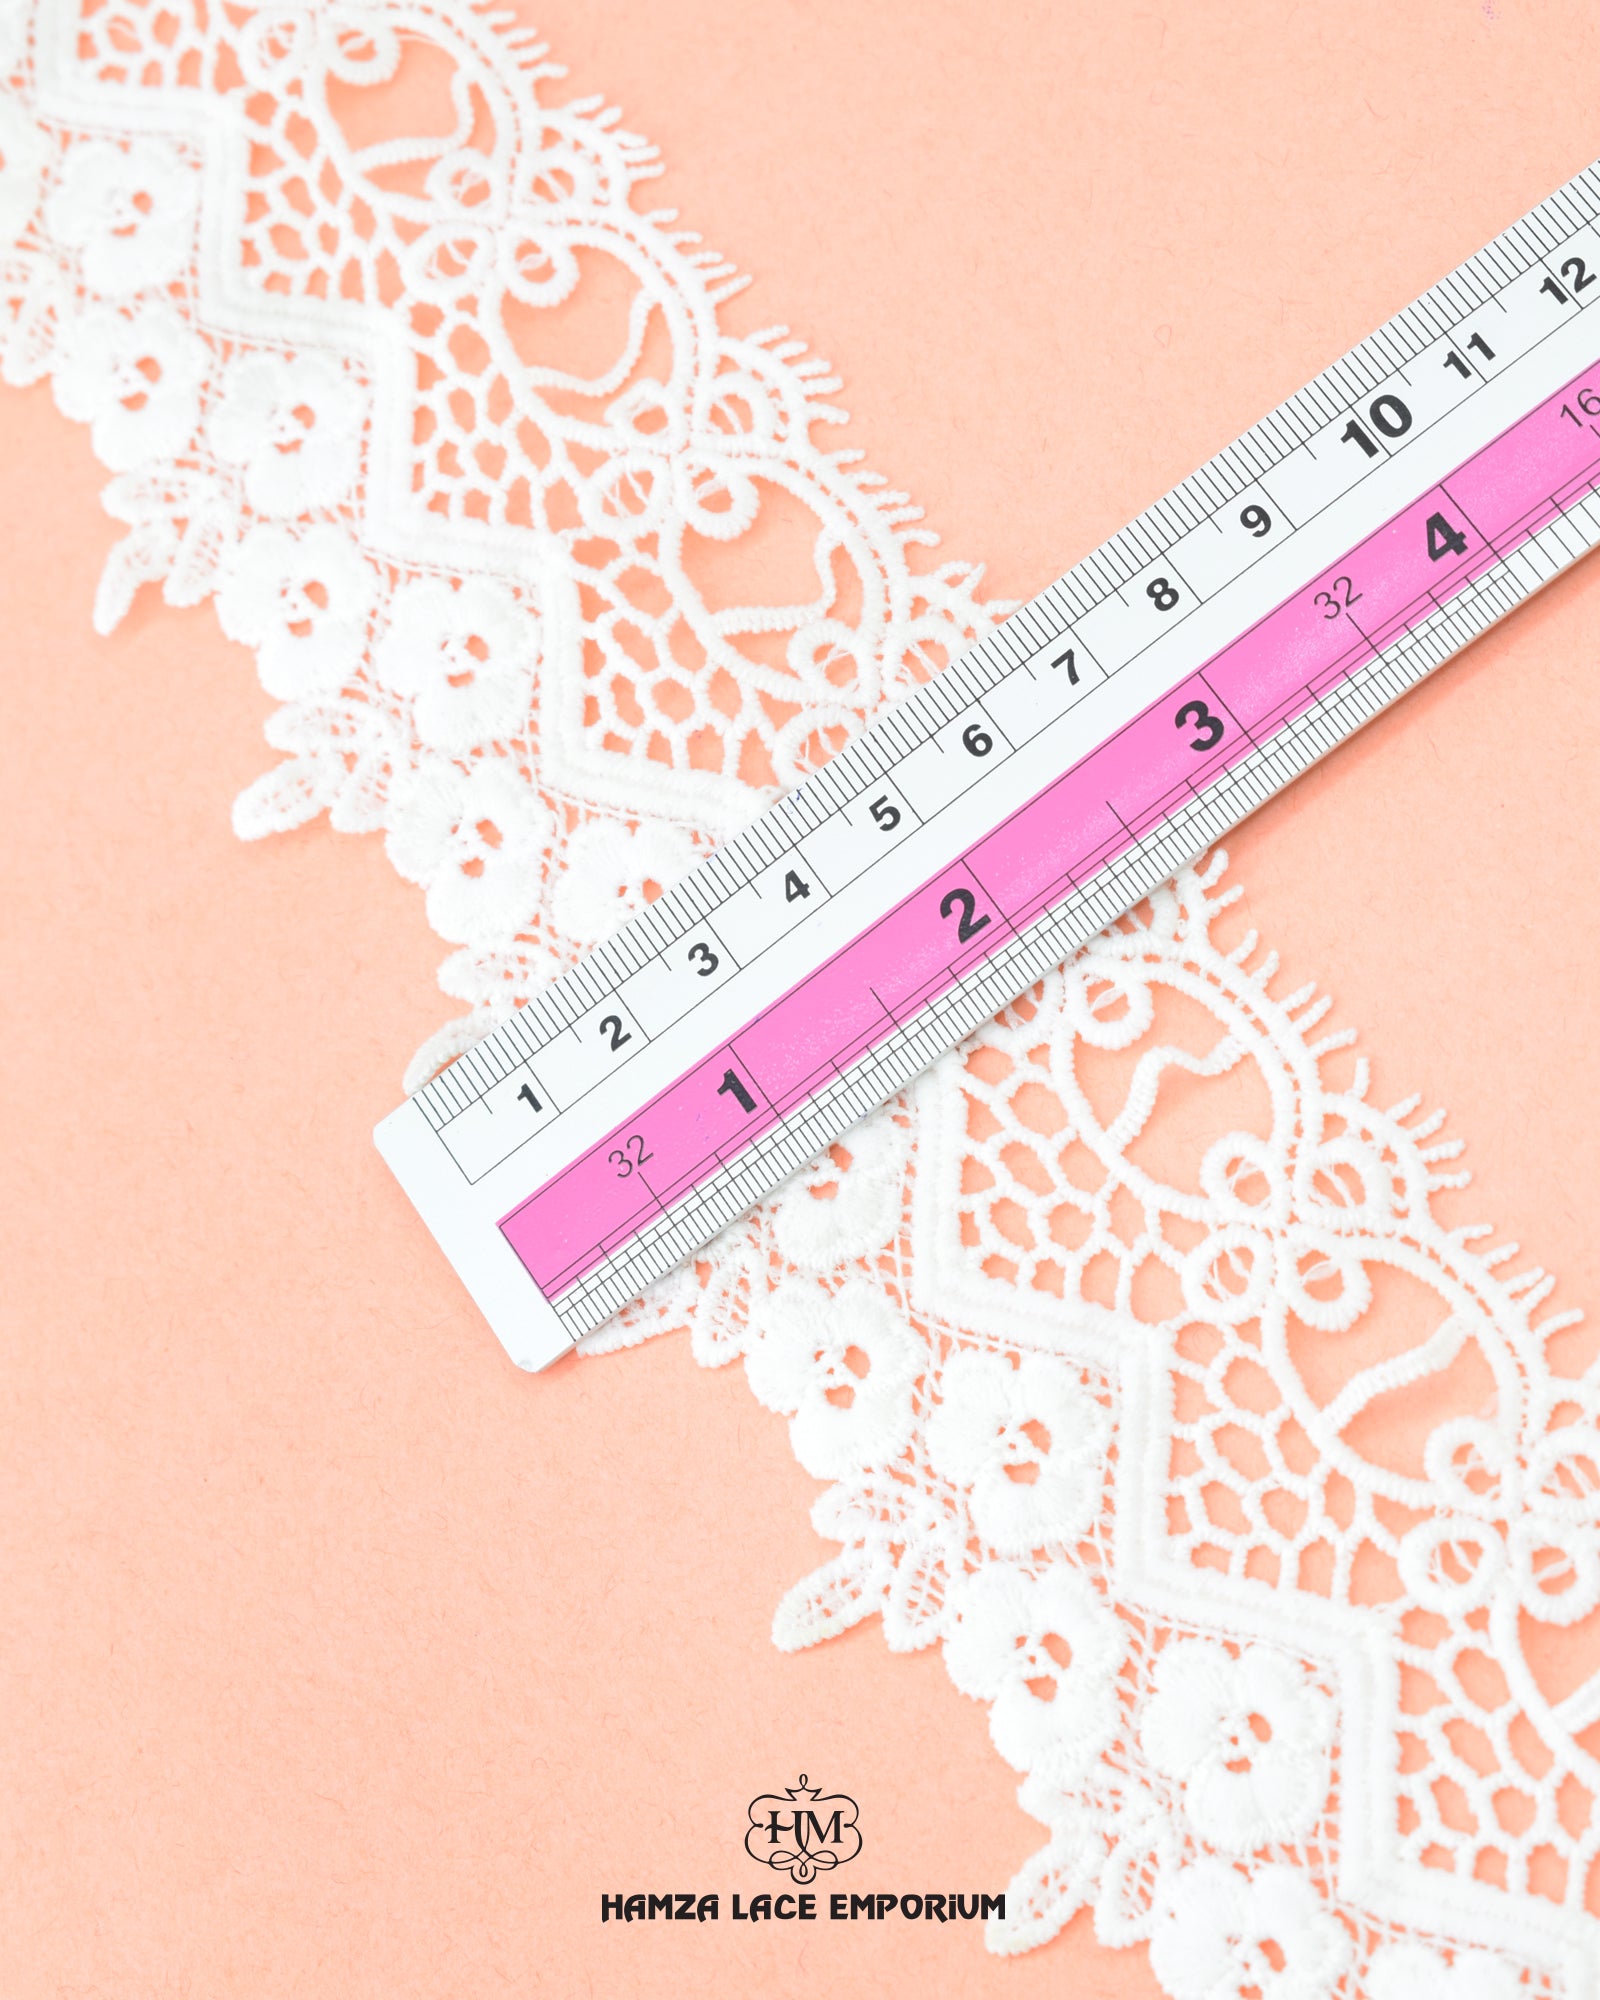 Size of the 'Edging Lace 23504' is shown as '2.75' inches with the help of a ruler